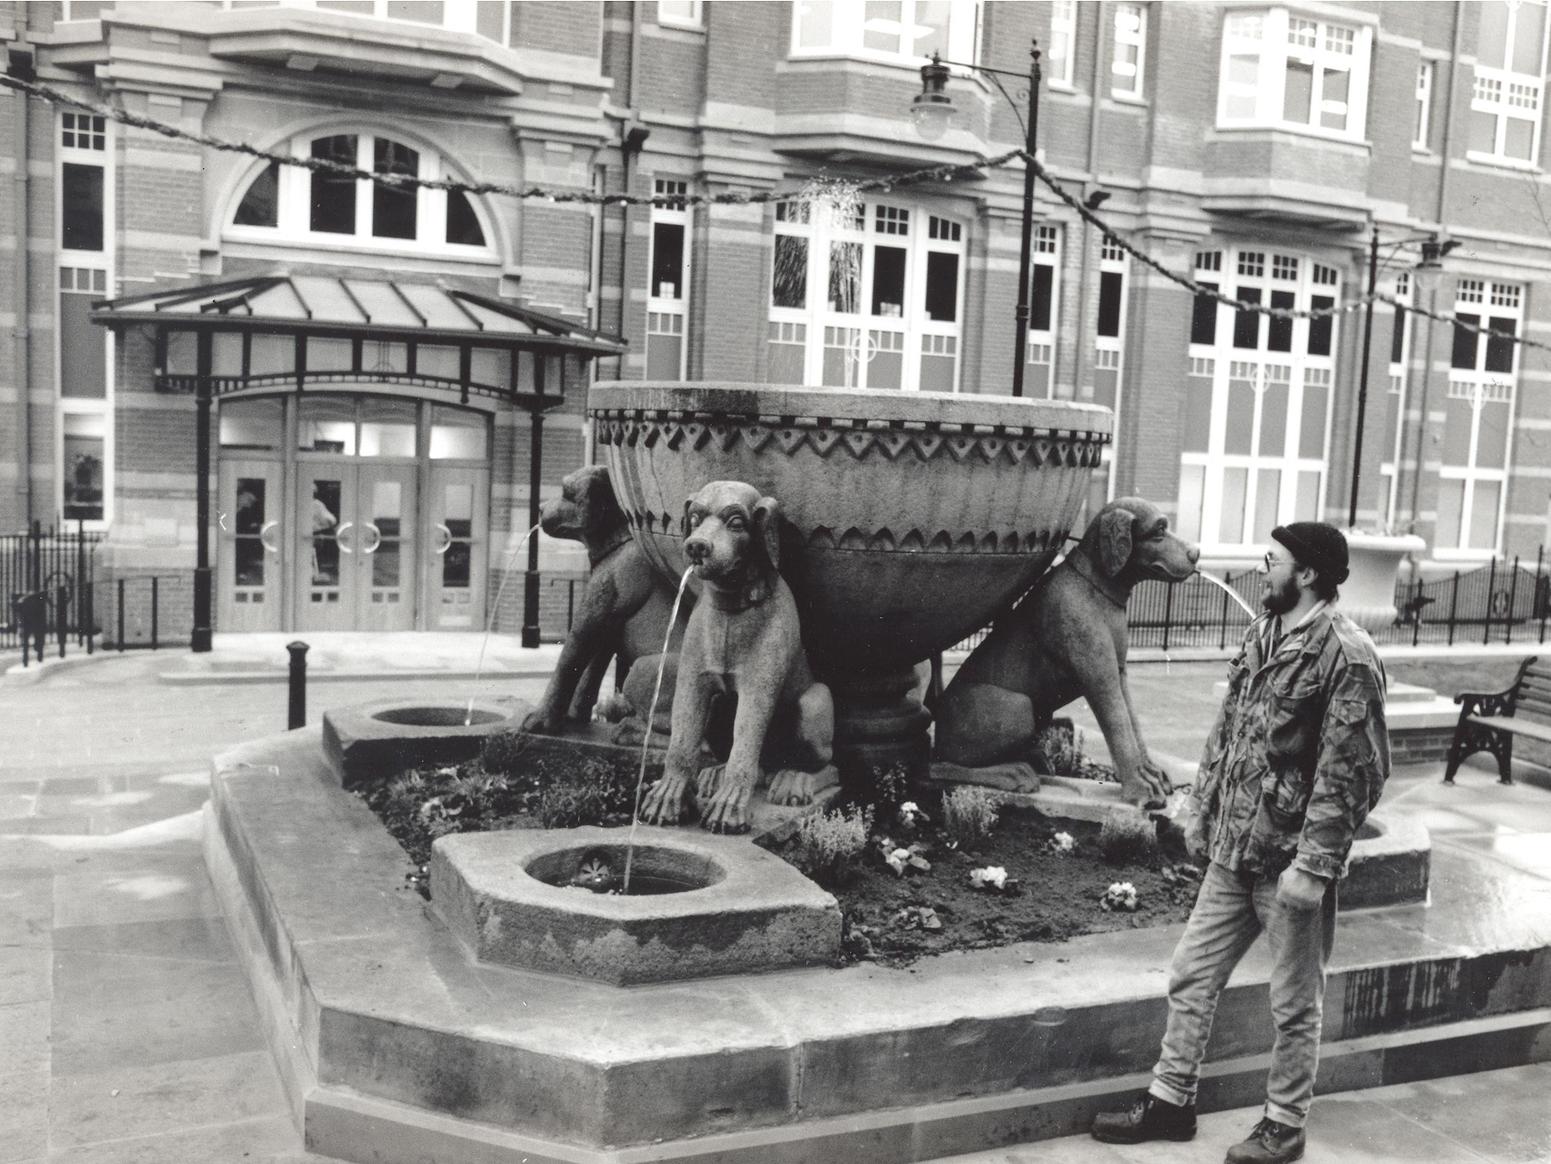 This eight foot reclaimed Victorian fountain with four massive stone dogs was the centrepiece of a Boar Lane office development, one the site of the former Trevelyan Temperance Hotel.